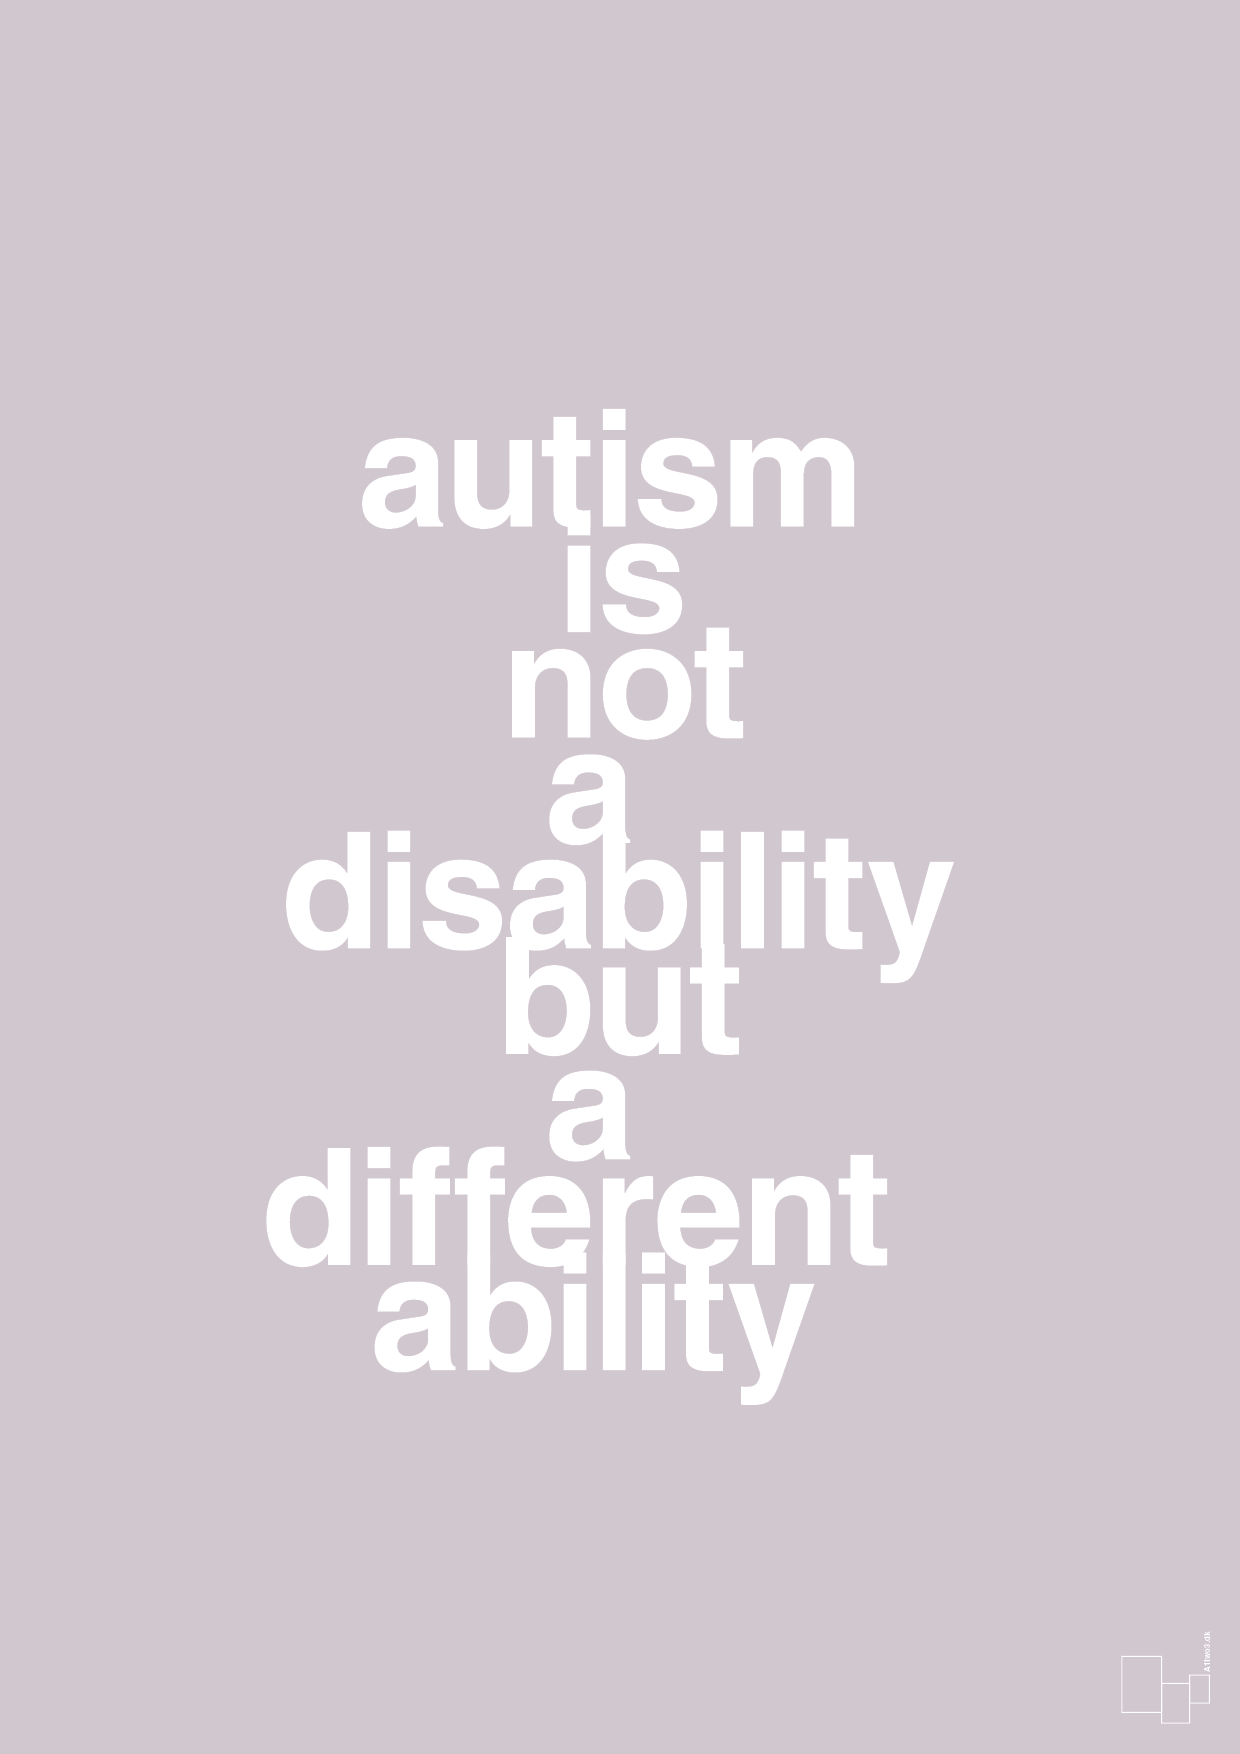 autism is not a disability but a different ability - Plakat med Samfund i Dusty Lilac